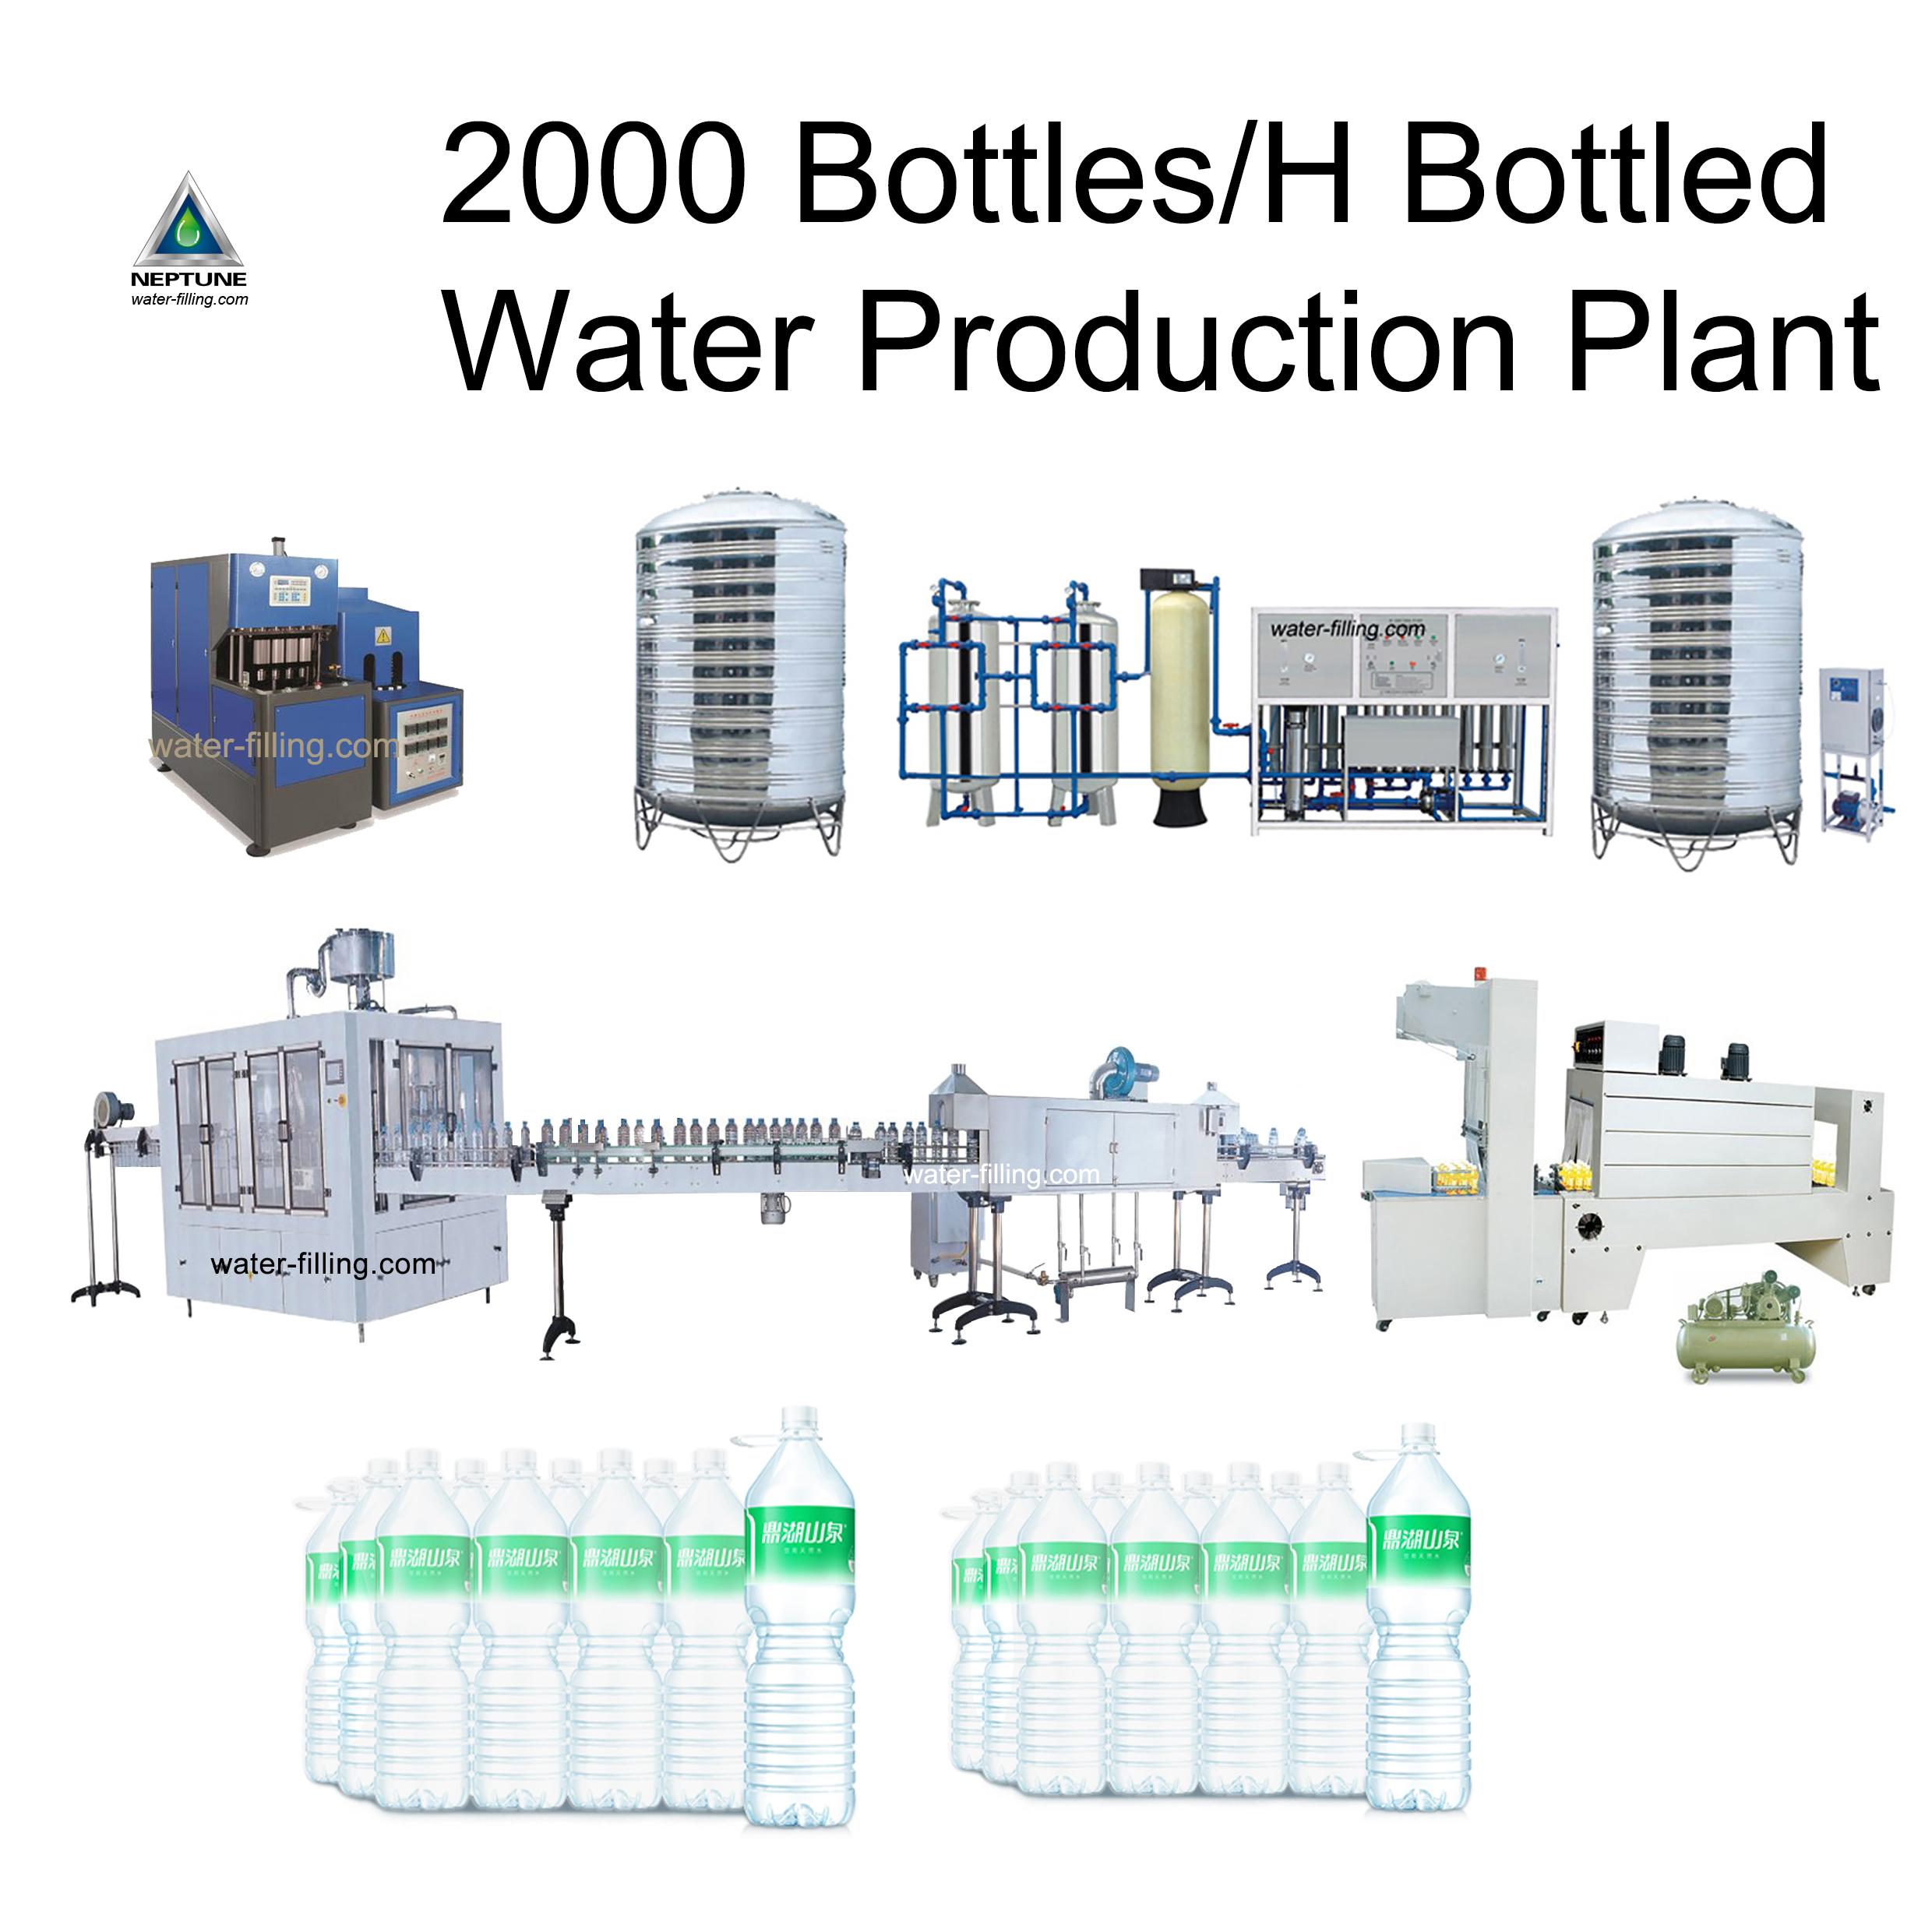 Bottled Water Production Plant NEP-S2000 complete set from beginning to the end